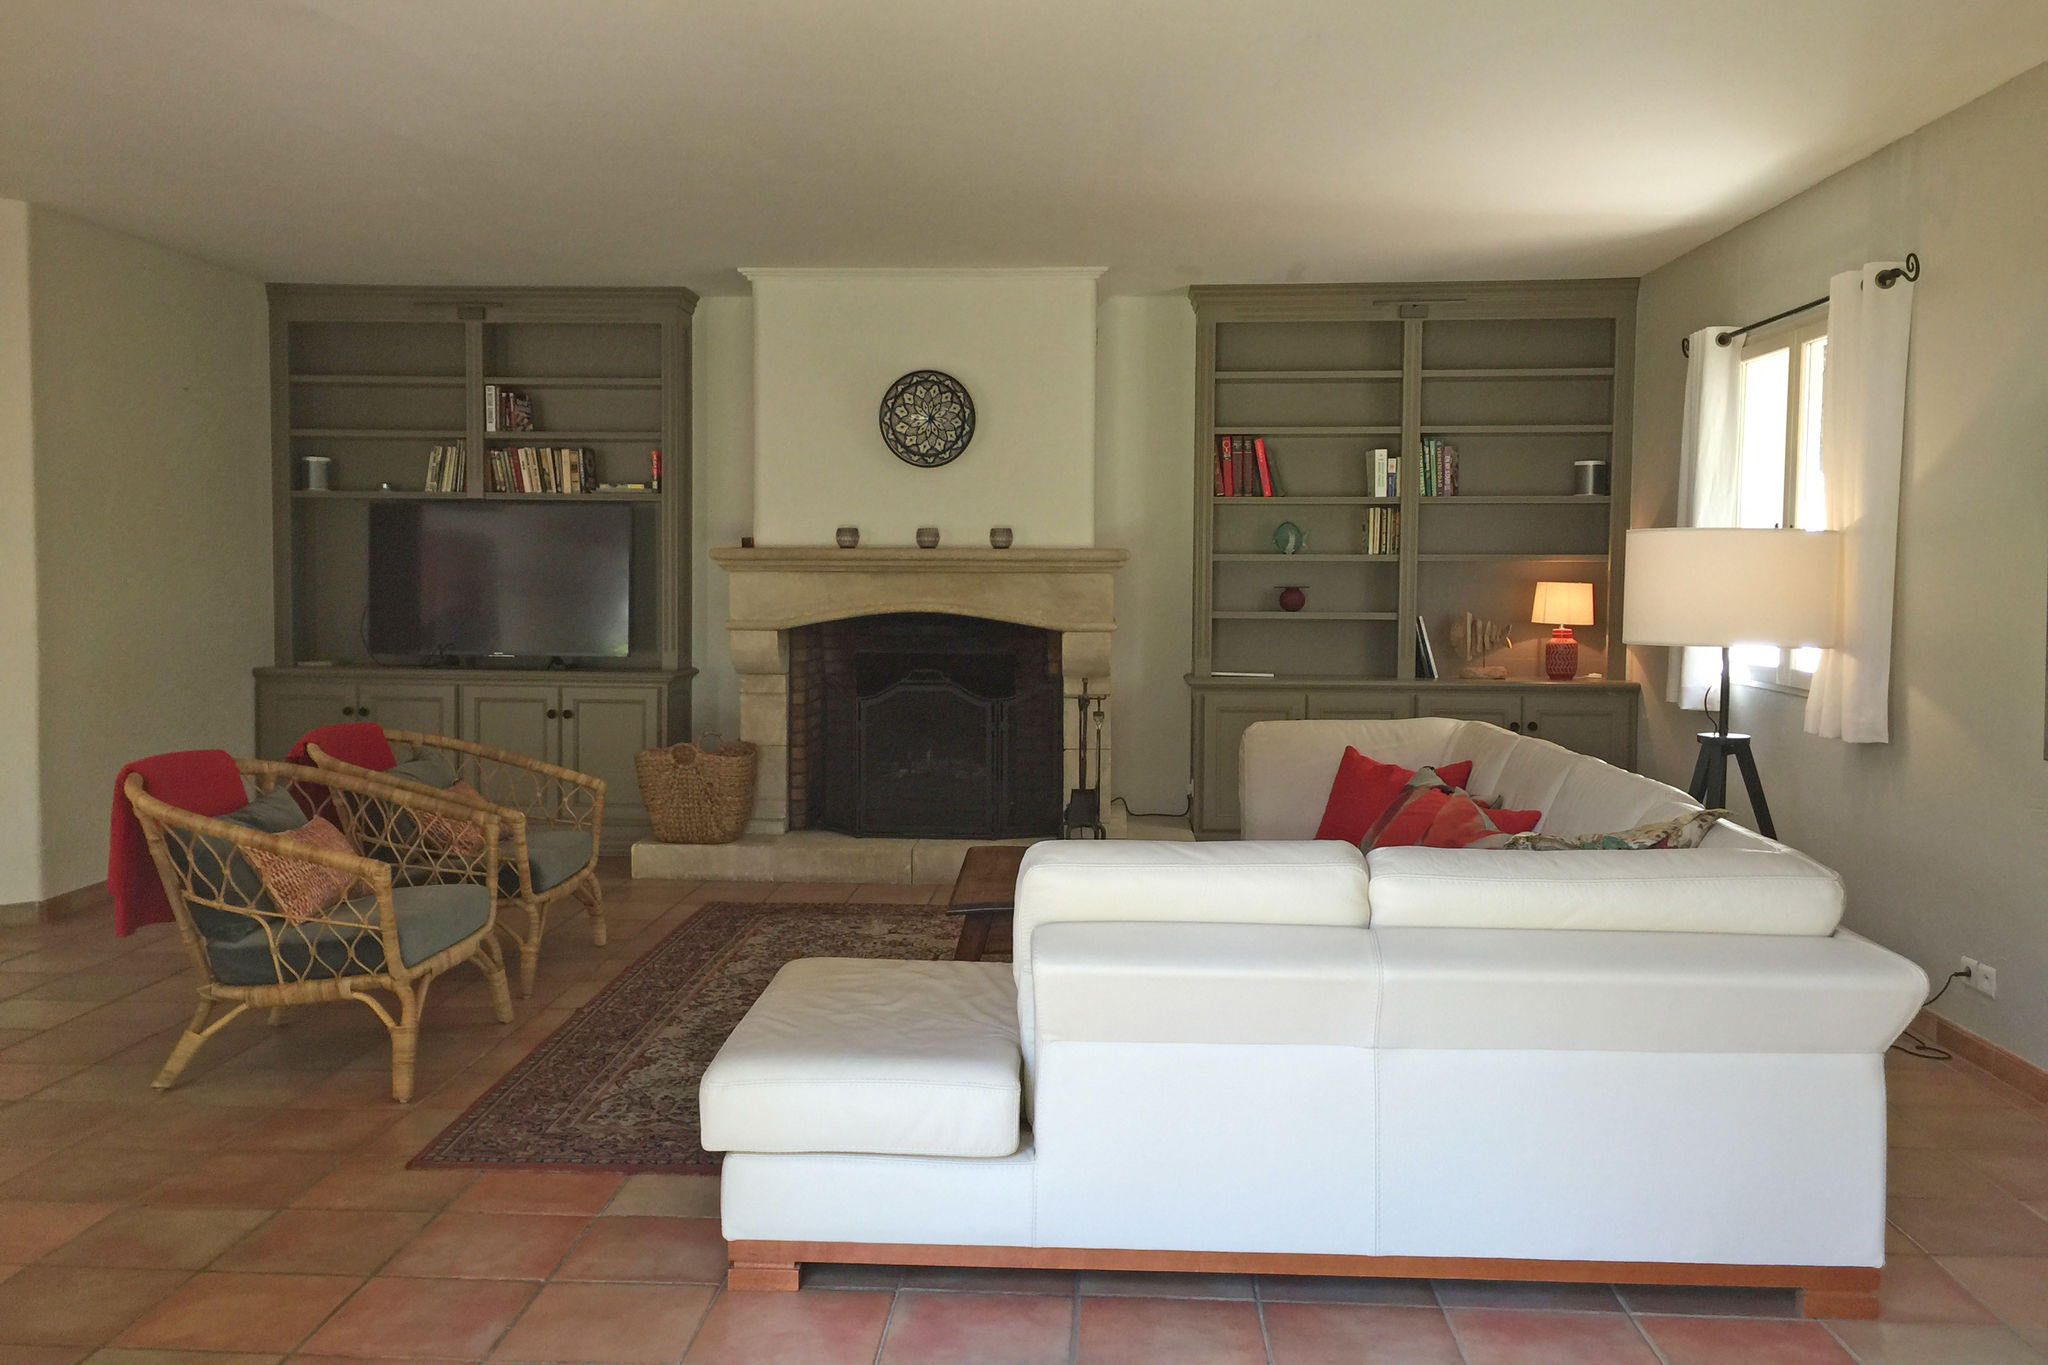 Spacious Villa in Lorgues with Private Terrace, Garden